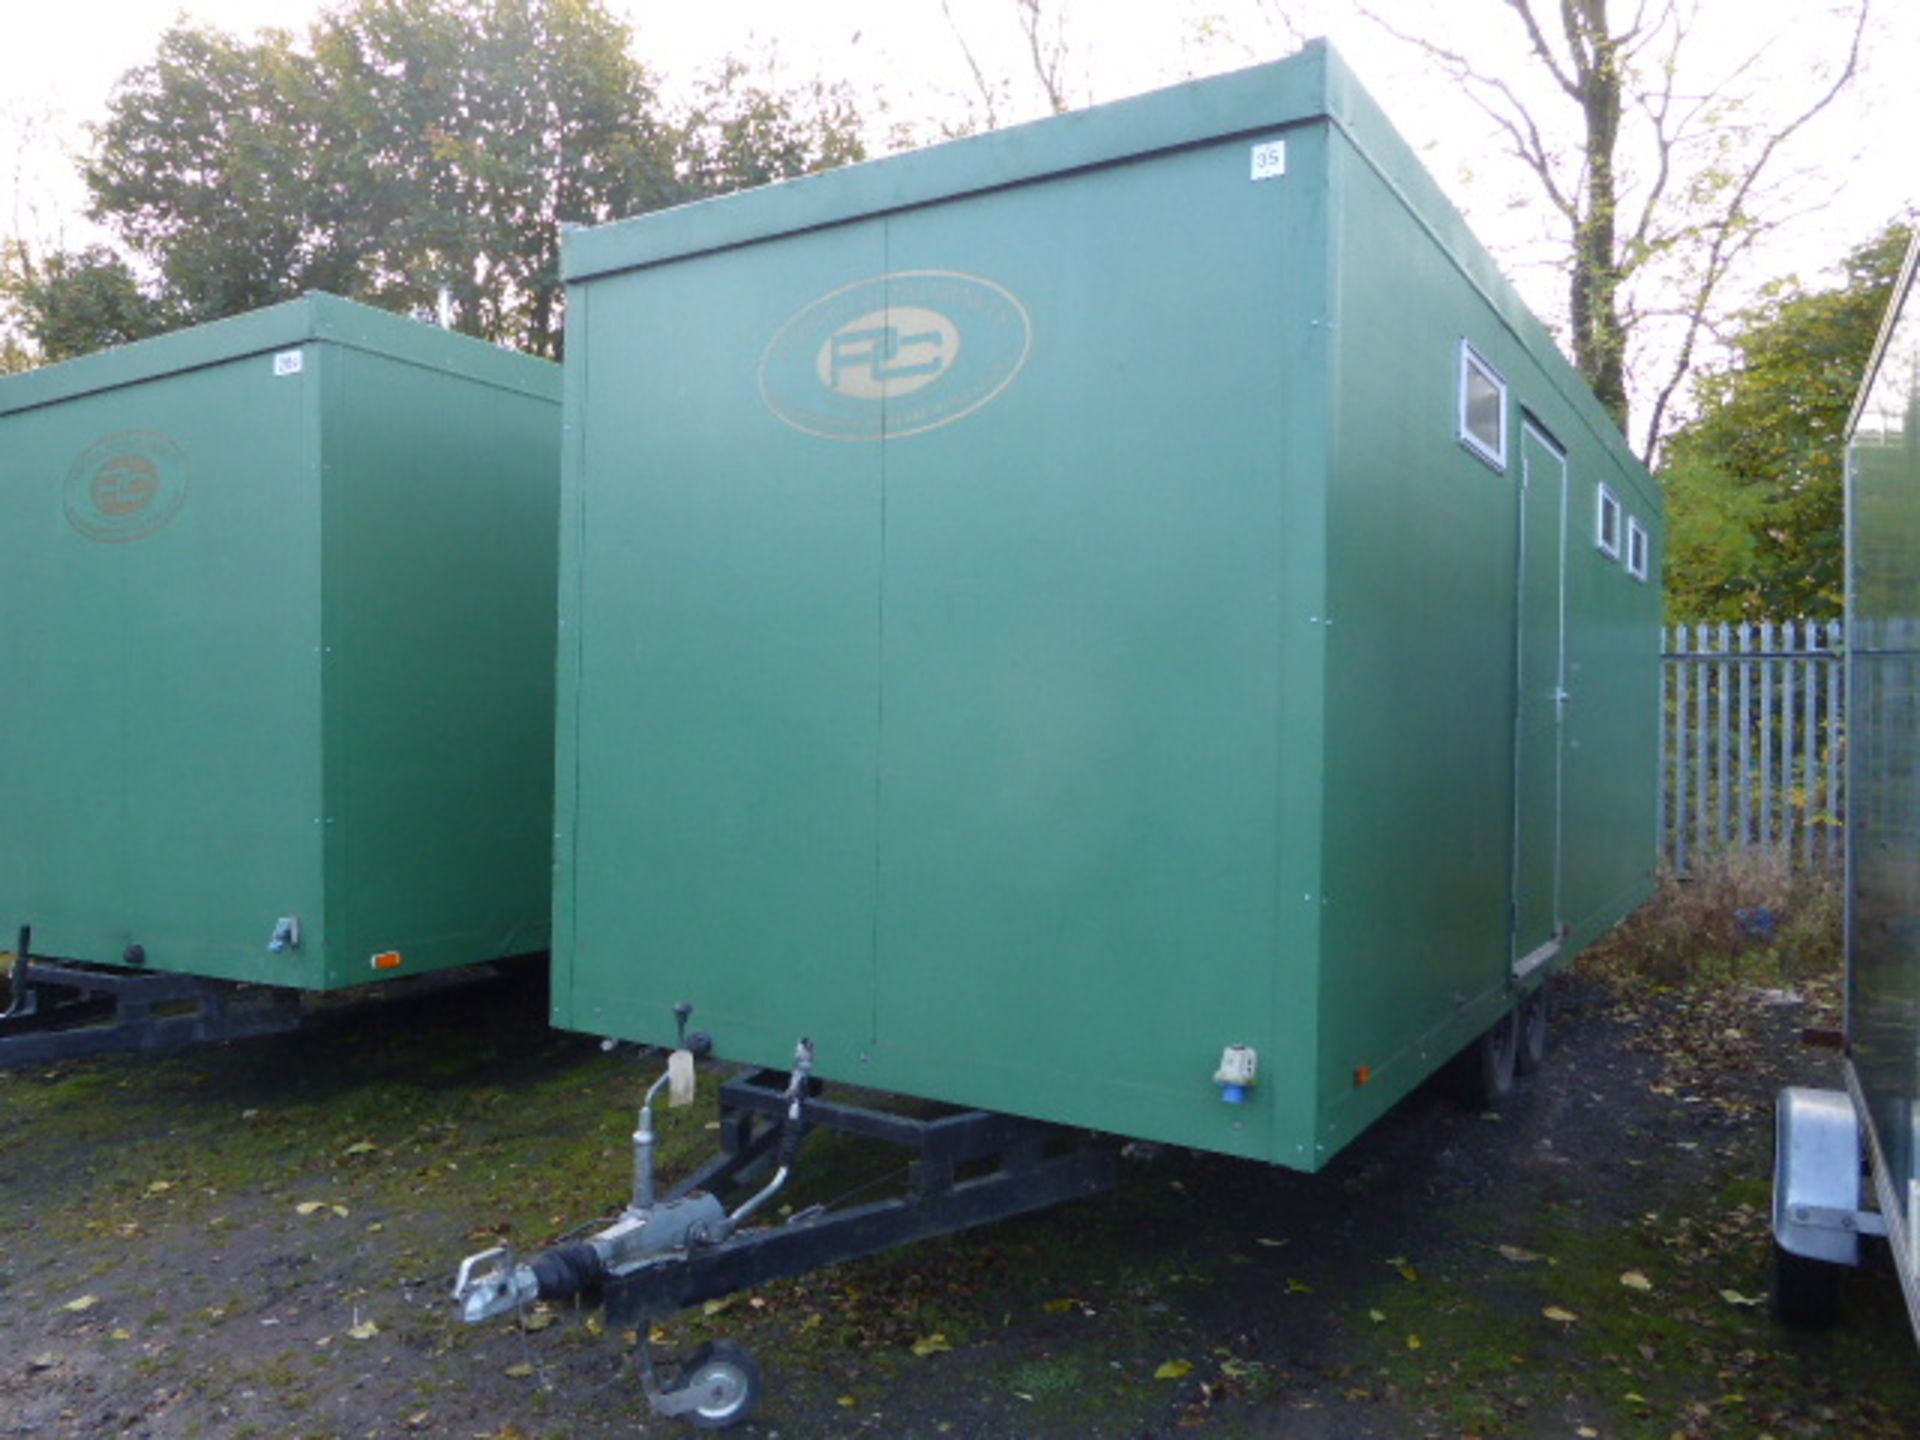 Springfield standard twin axle toilet trailer 4 + 2 + urinal toilet trailer with mains